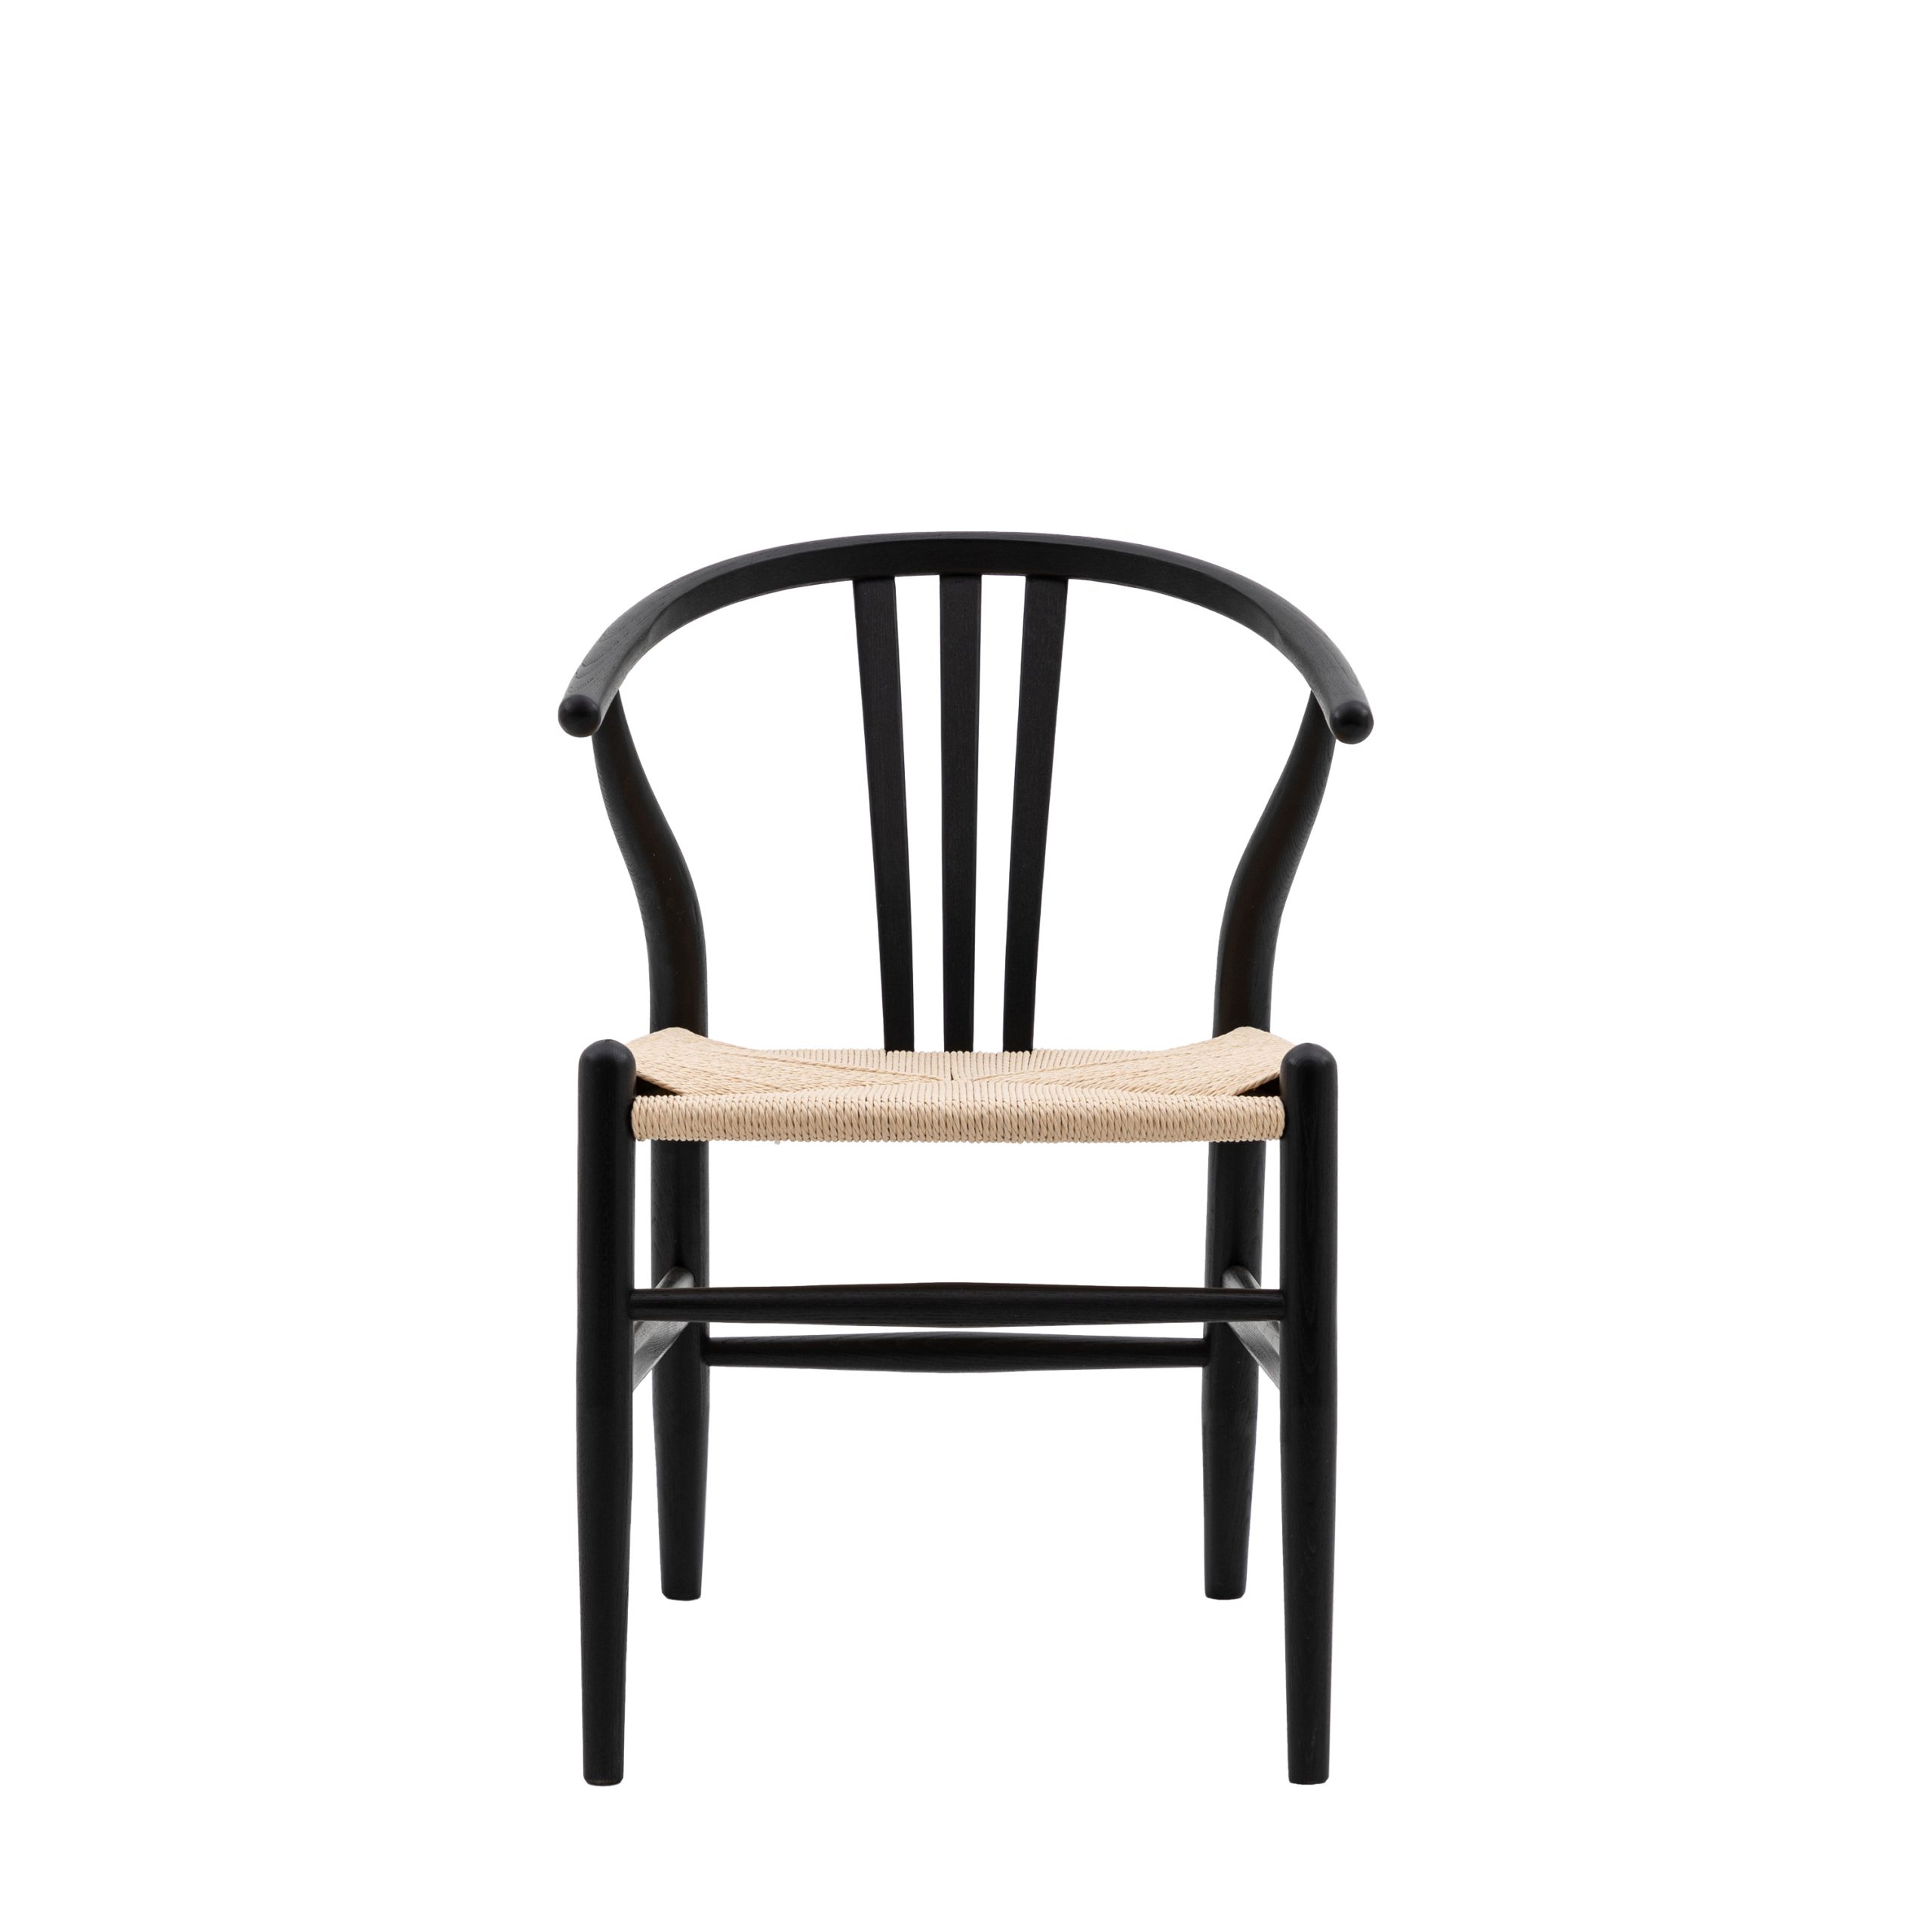 Gallery Direct Whitney Chair Black (Set of 2)